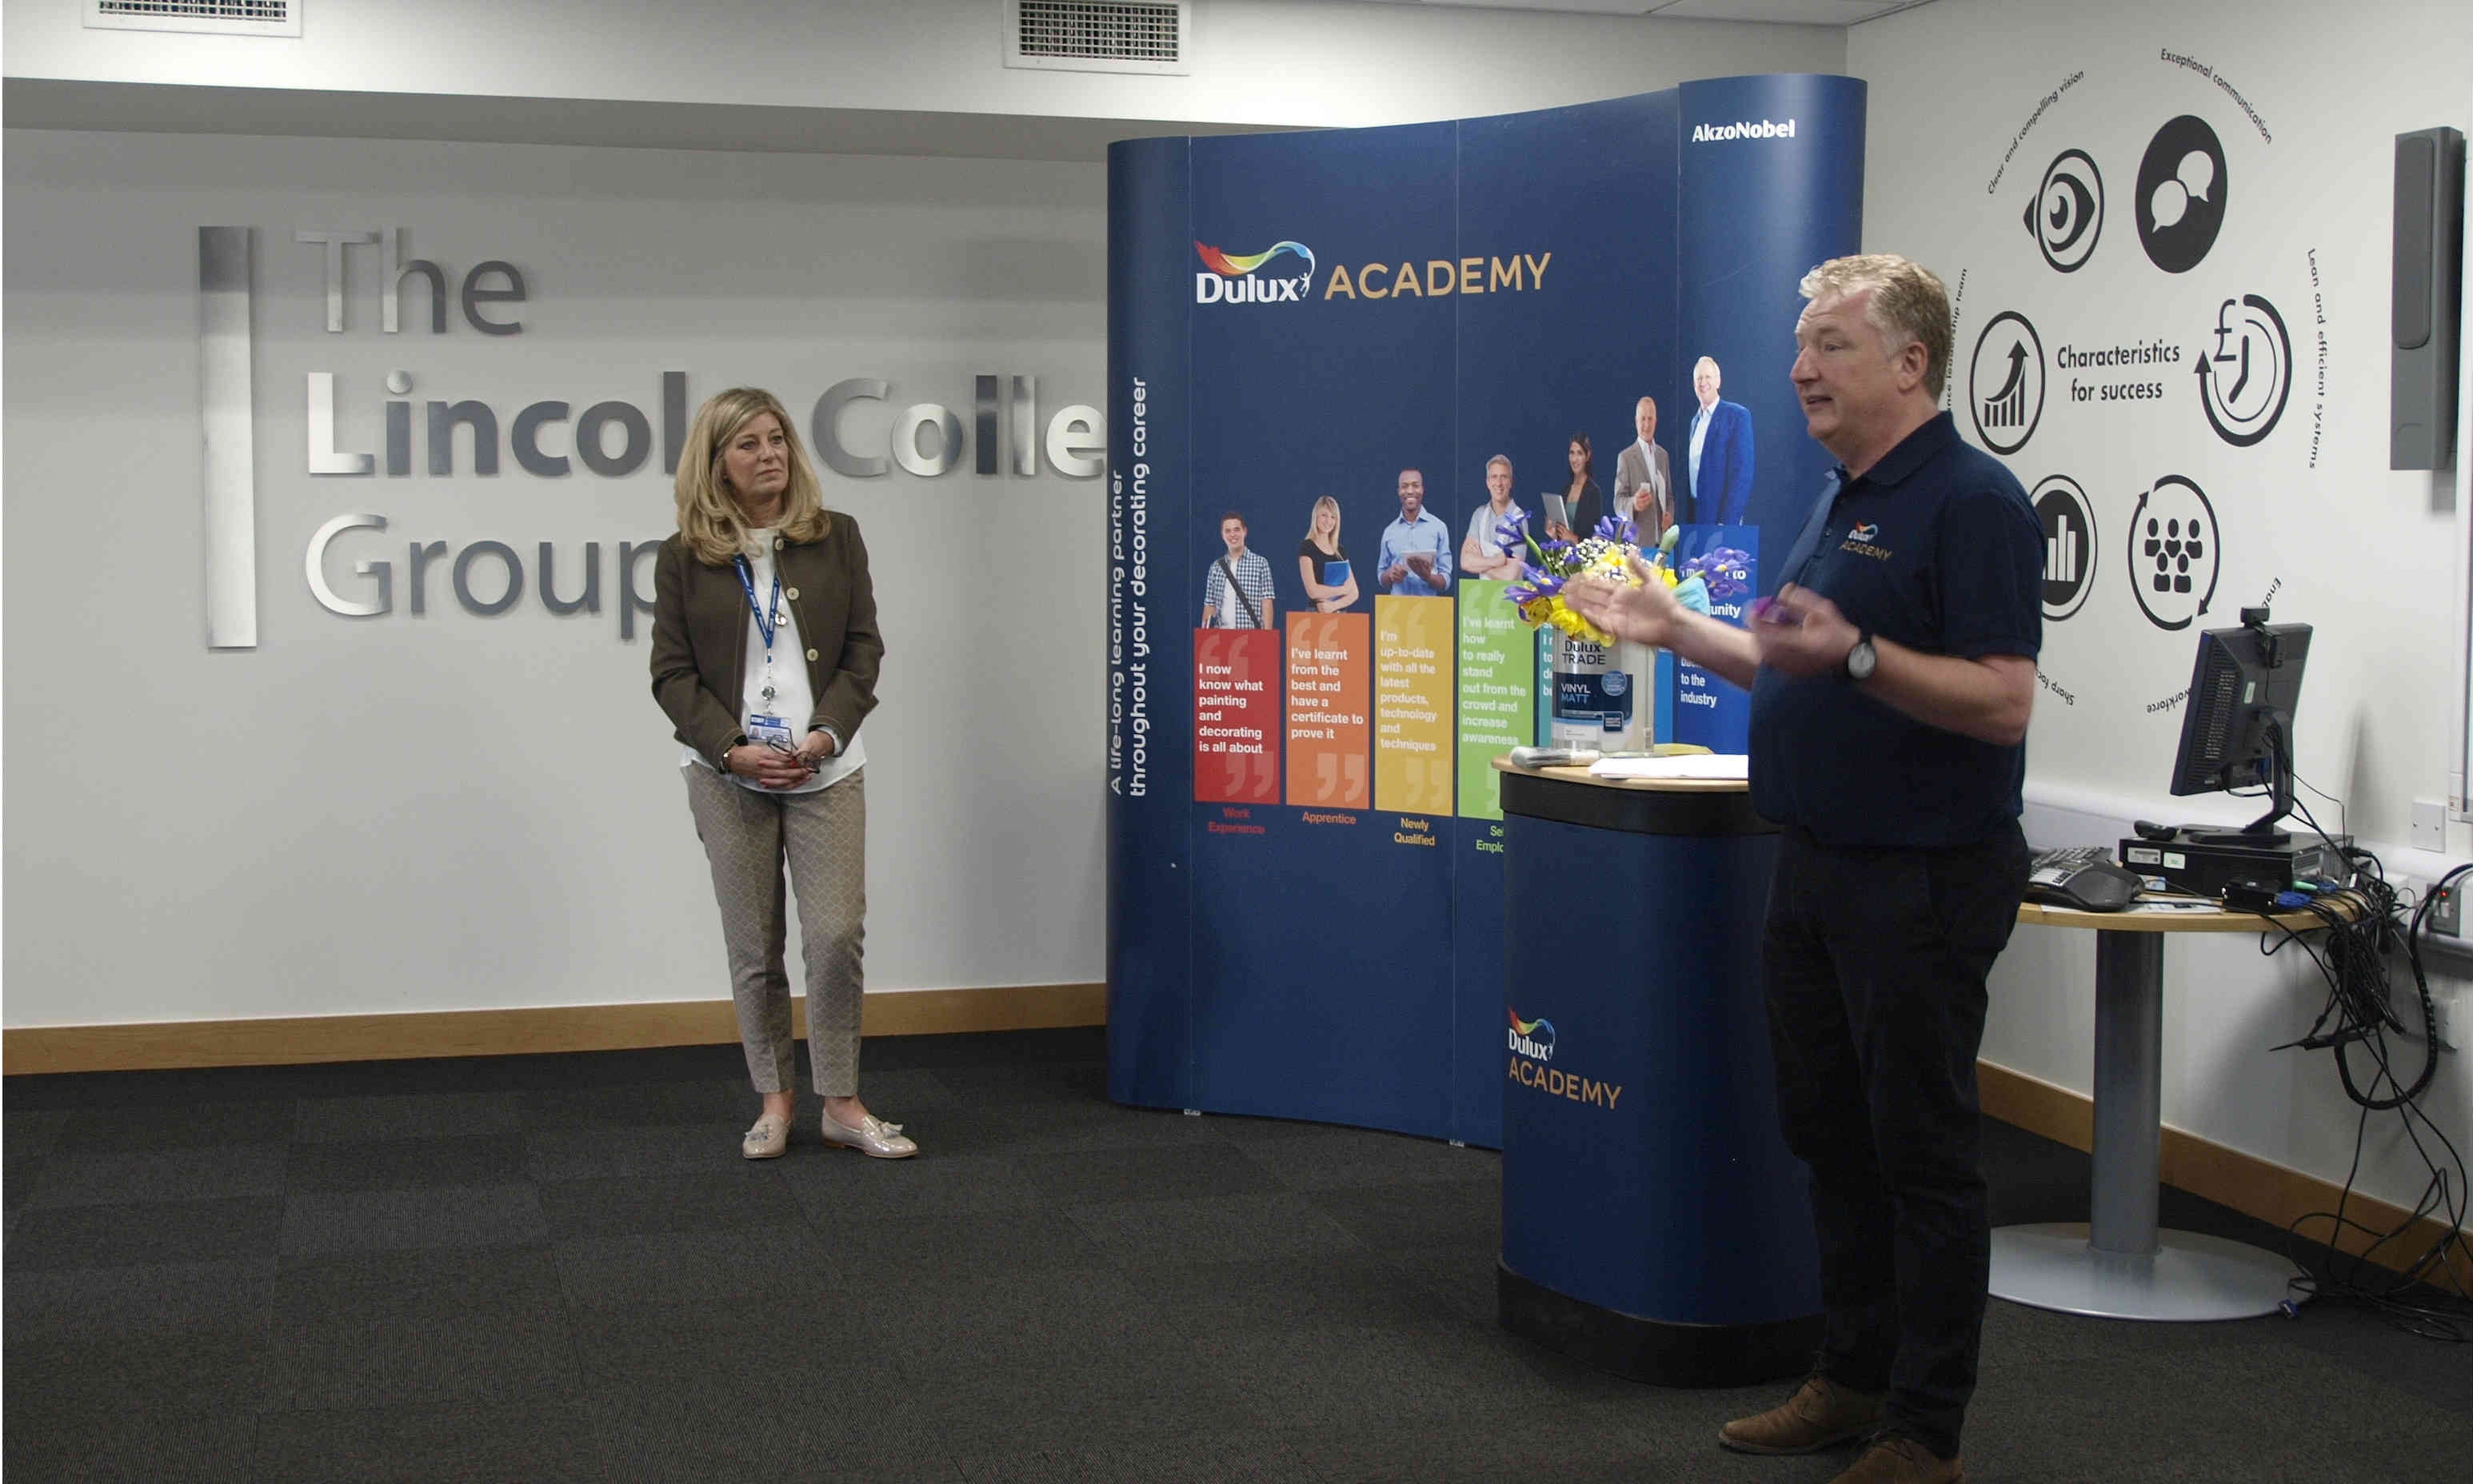 Dulux Academy opens its latest partner facility in Lincoln